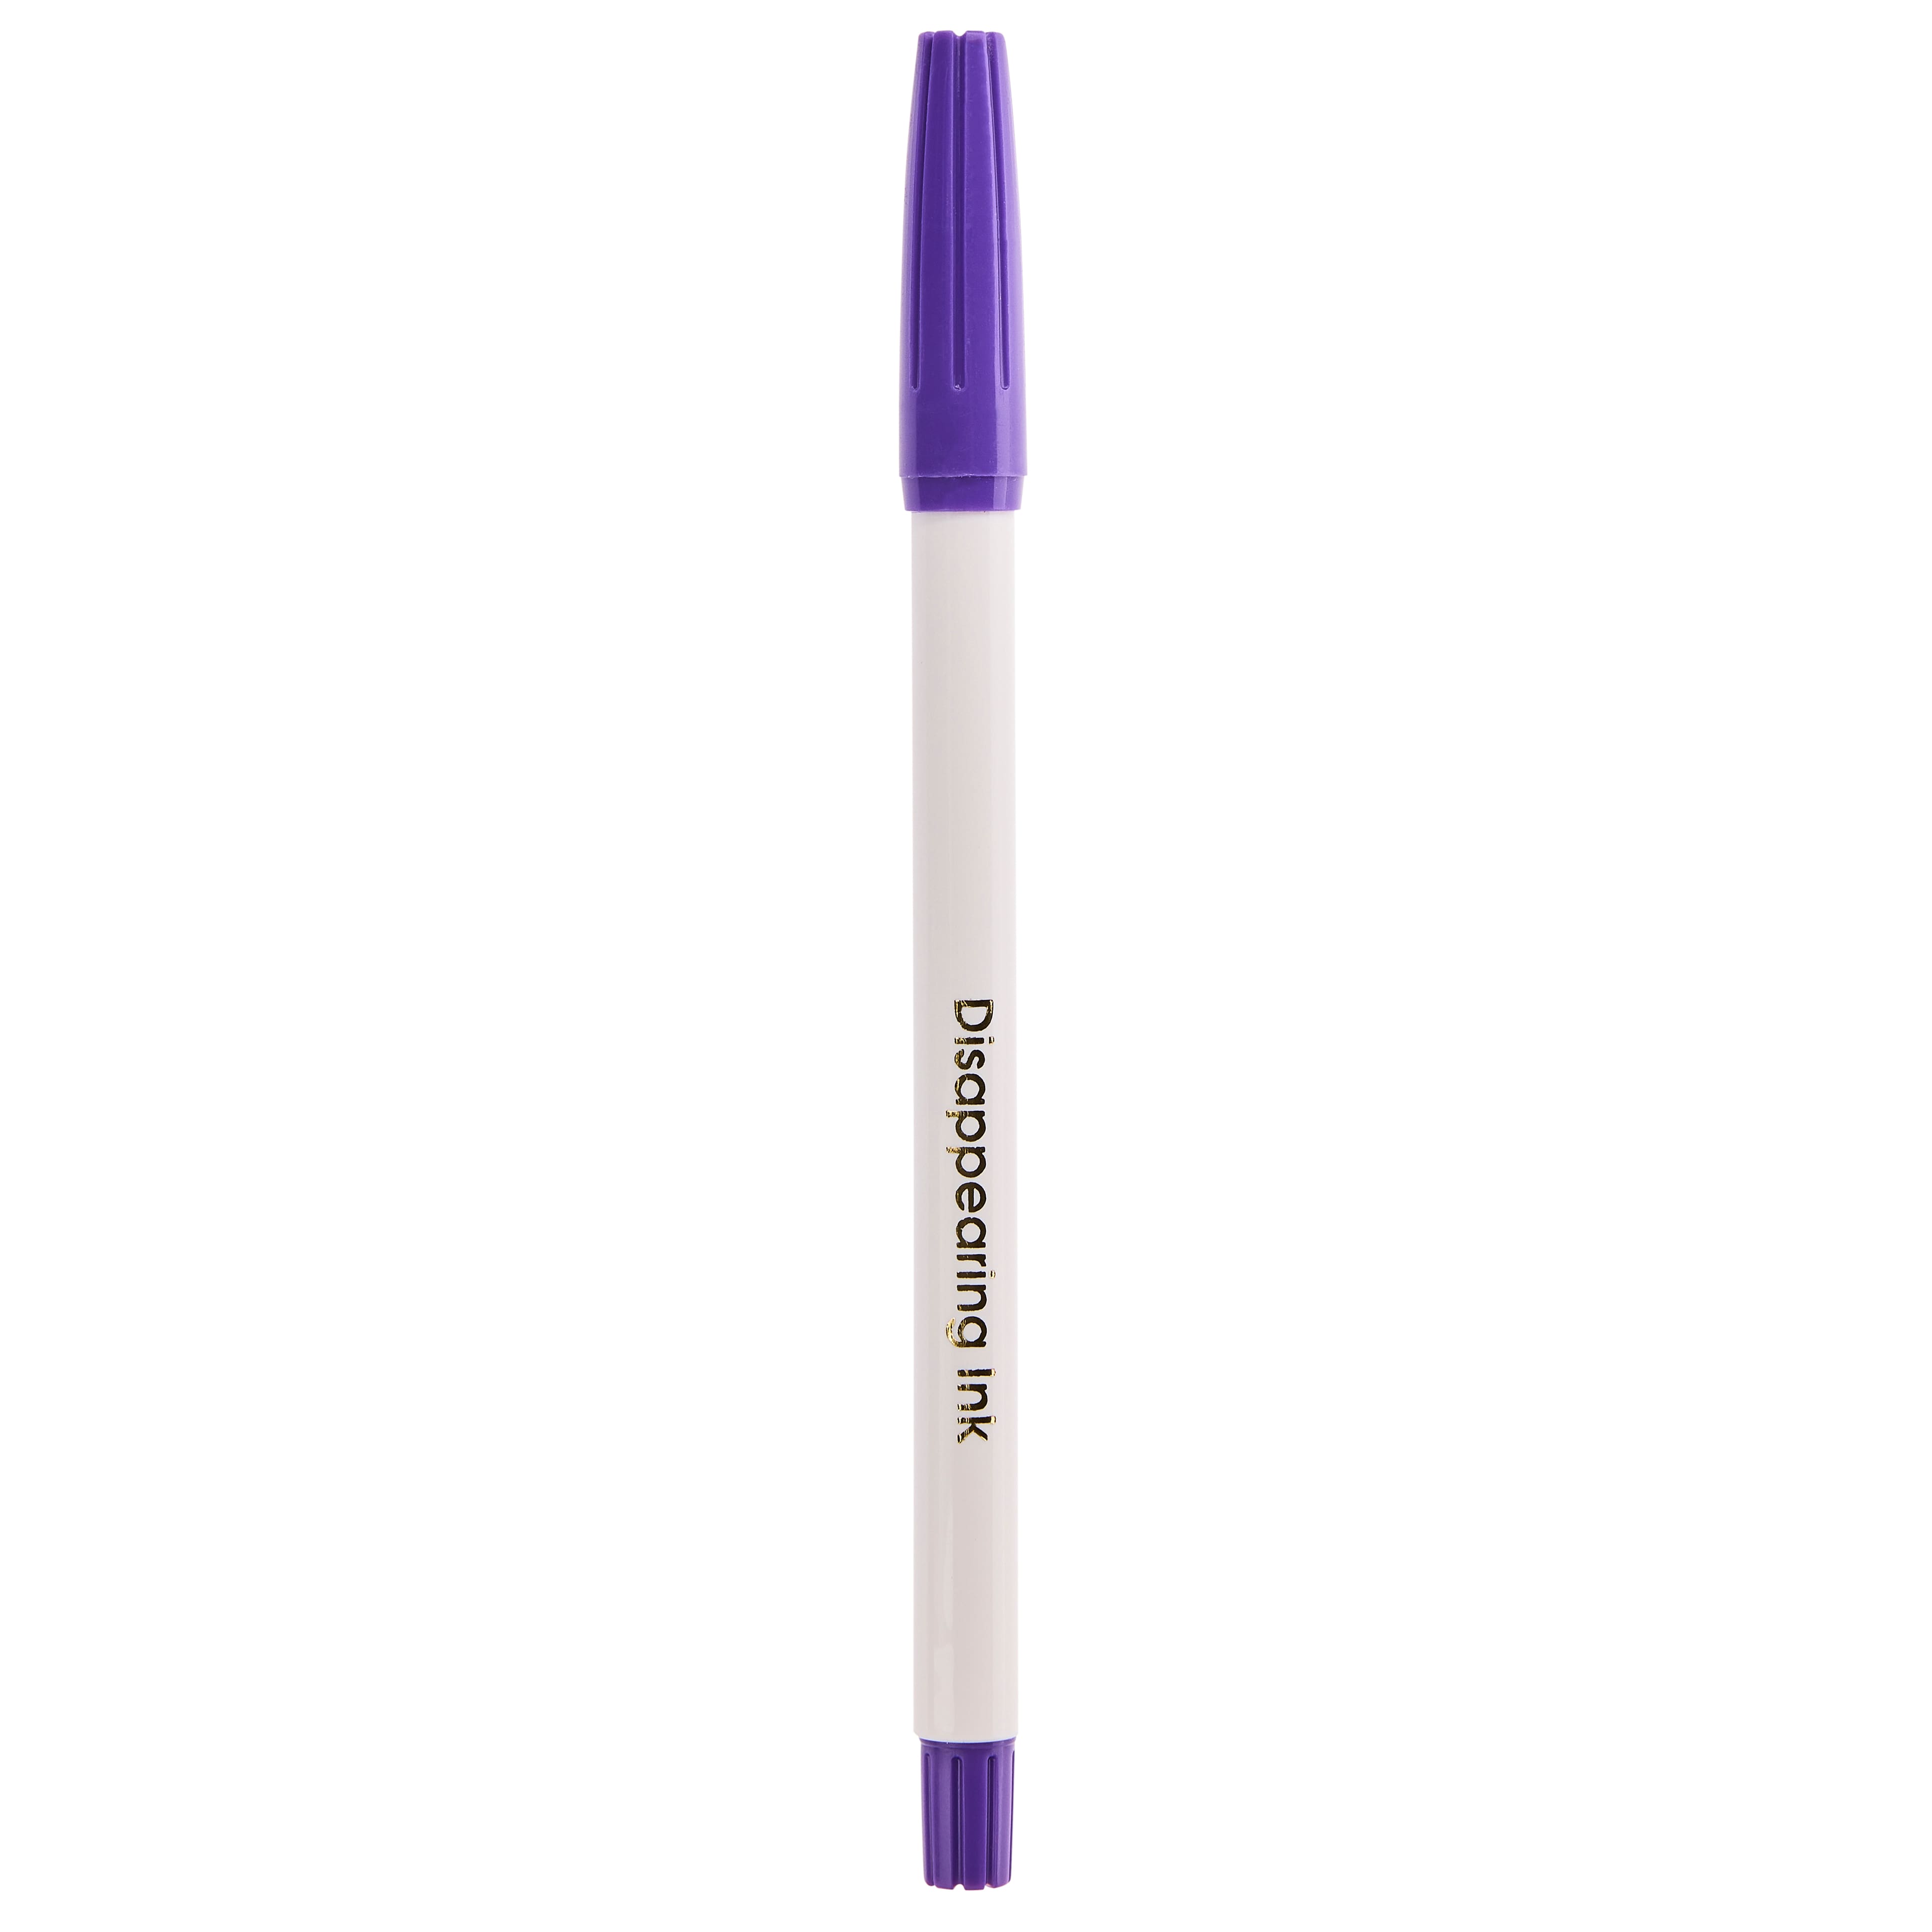 Dritz Quilting Disappearing Ink Marking Pen - Purple 